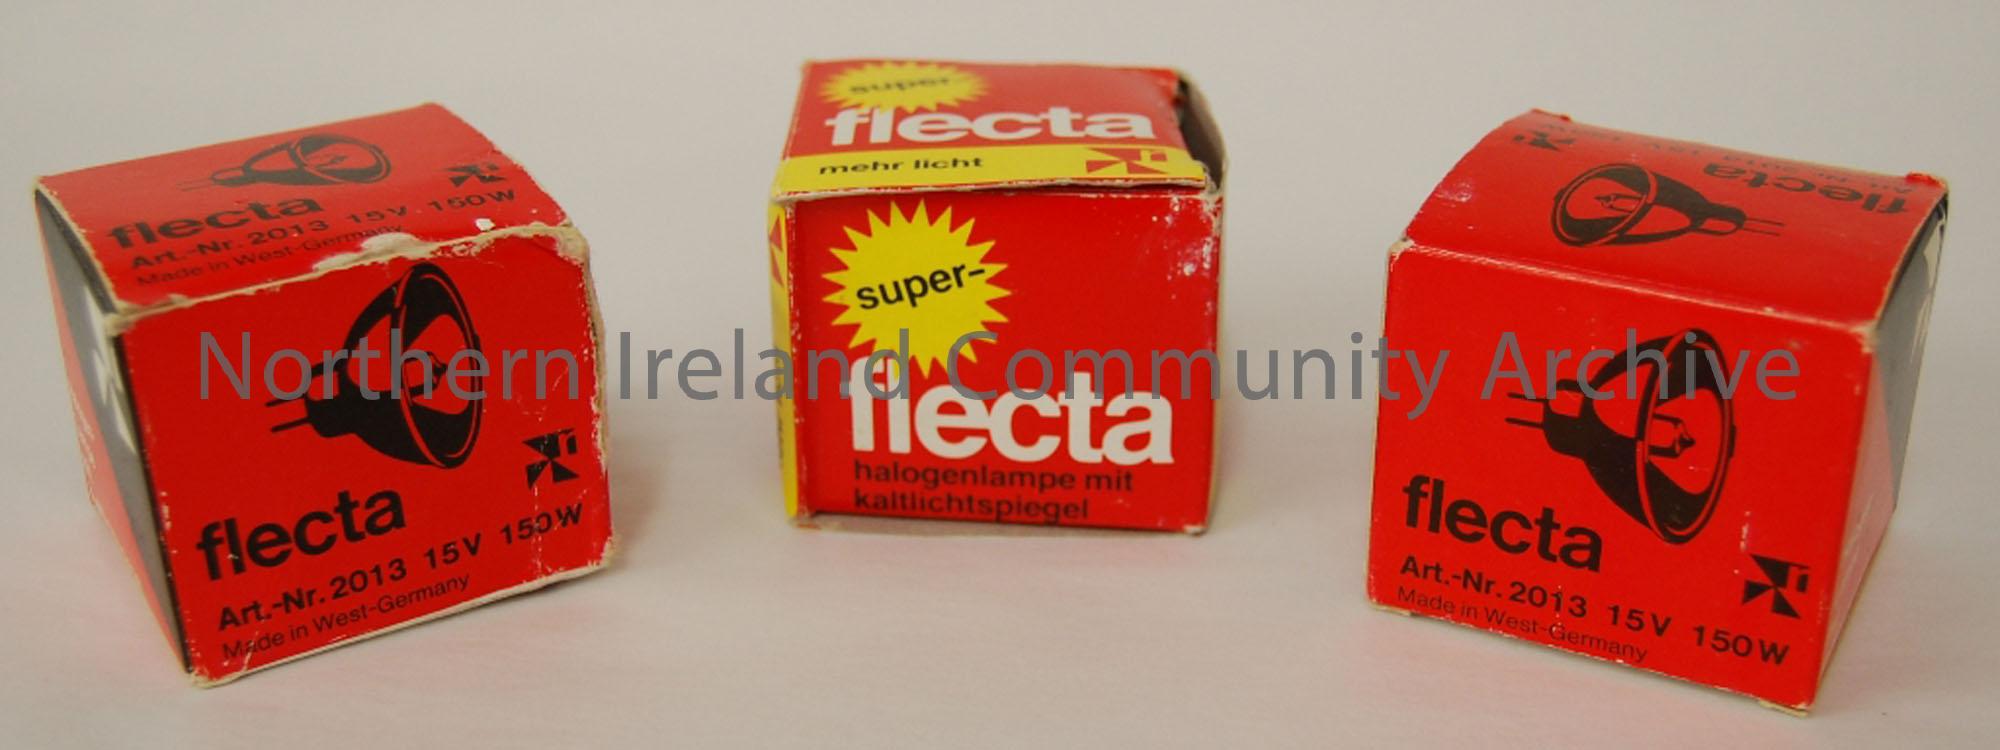 Three Flecta Halogen lamps. 15V, 150W in original red boxes